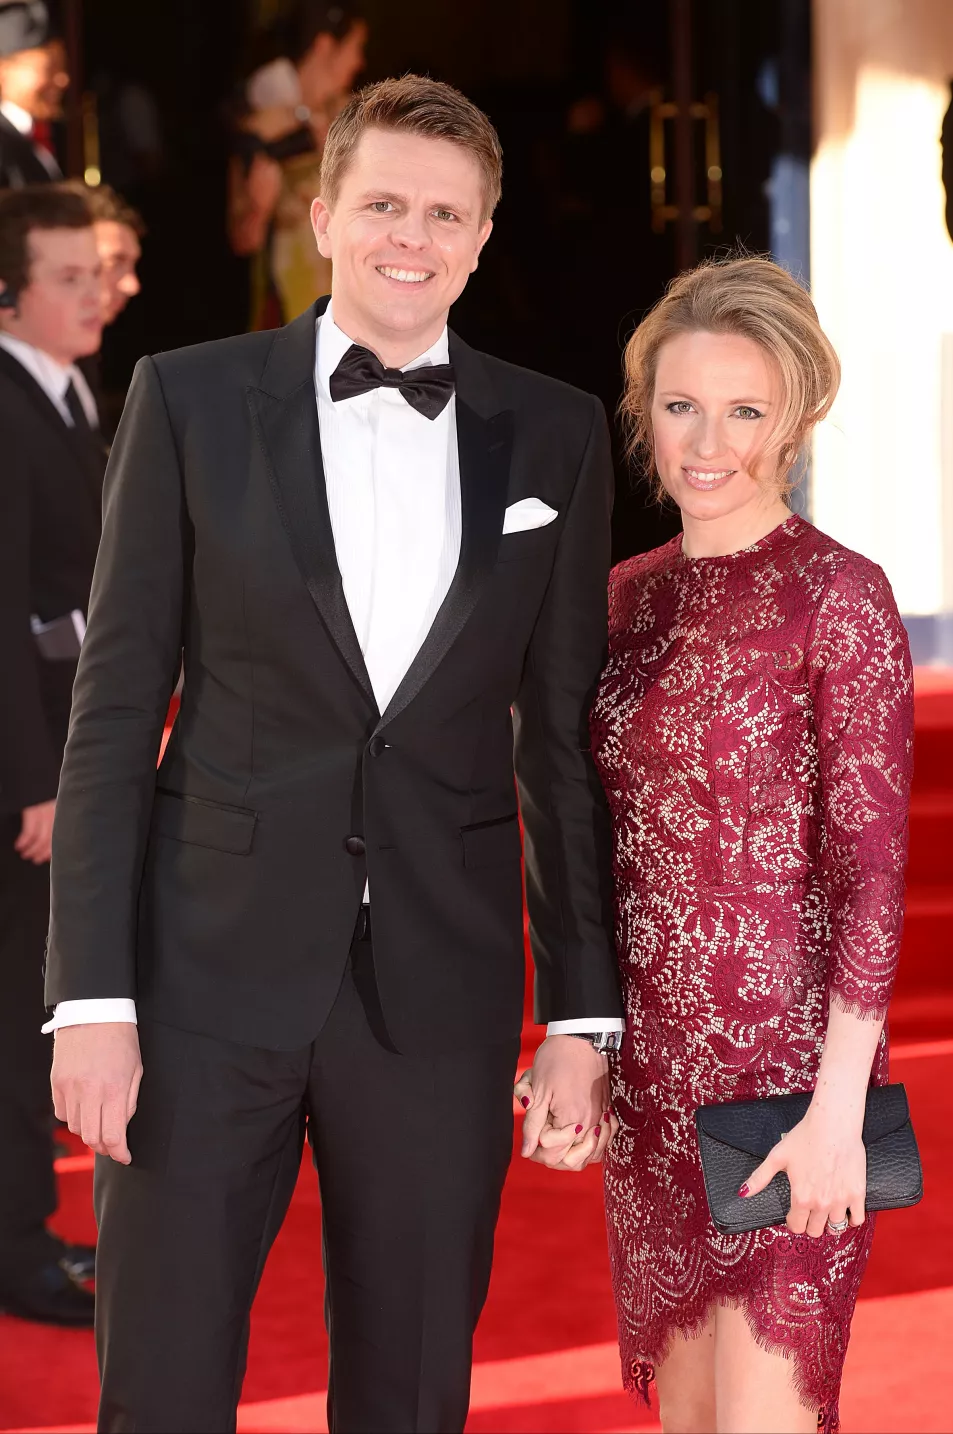 Jake Humphrey and wife Harriet at a red carpet event in 2014